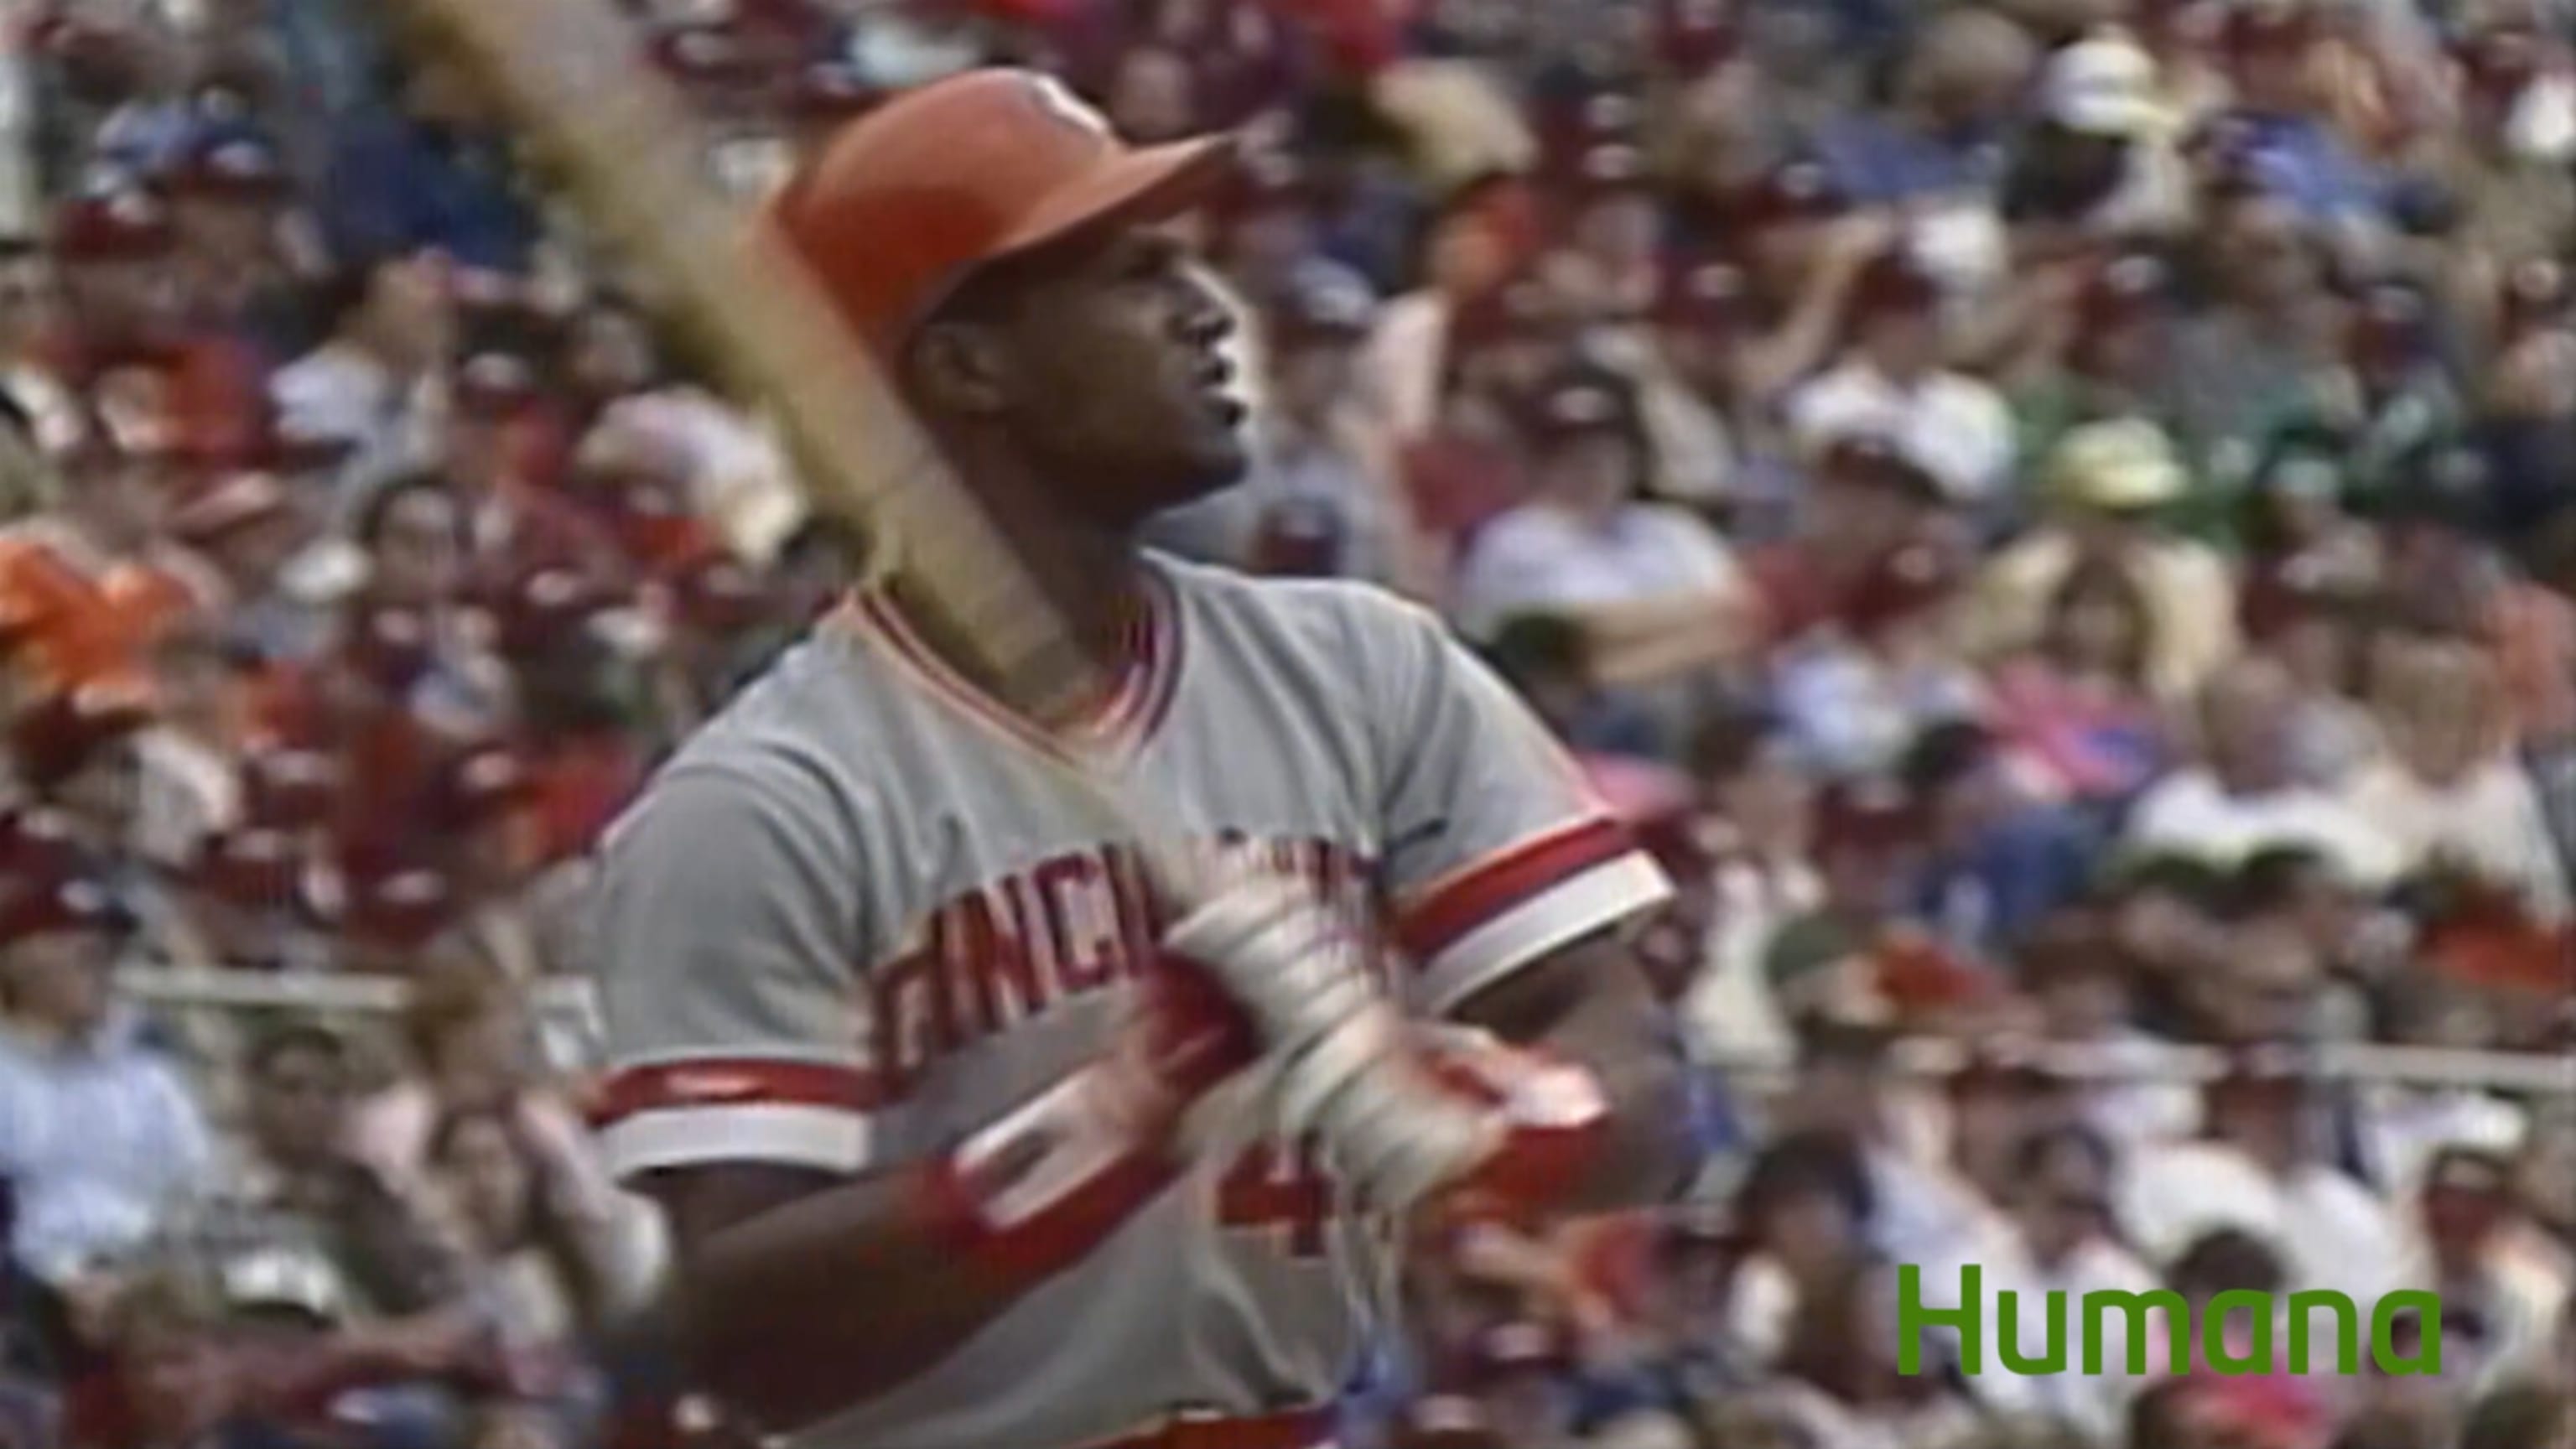 Eric the Red': A look at Eric Davis with the Cincinnati Reds